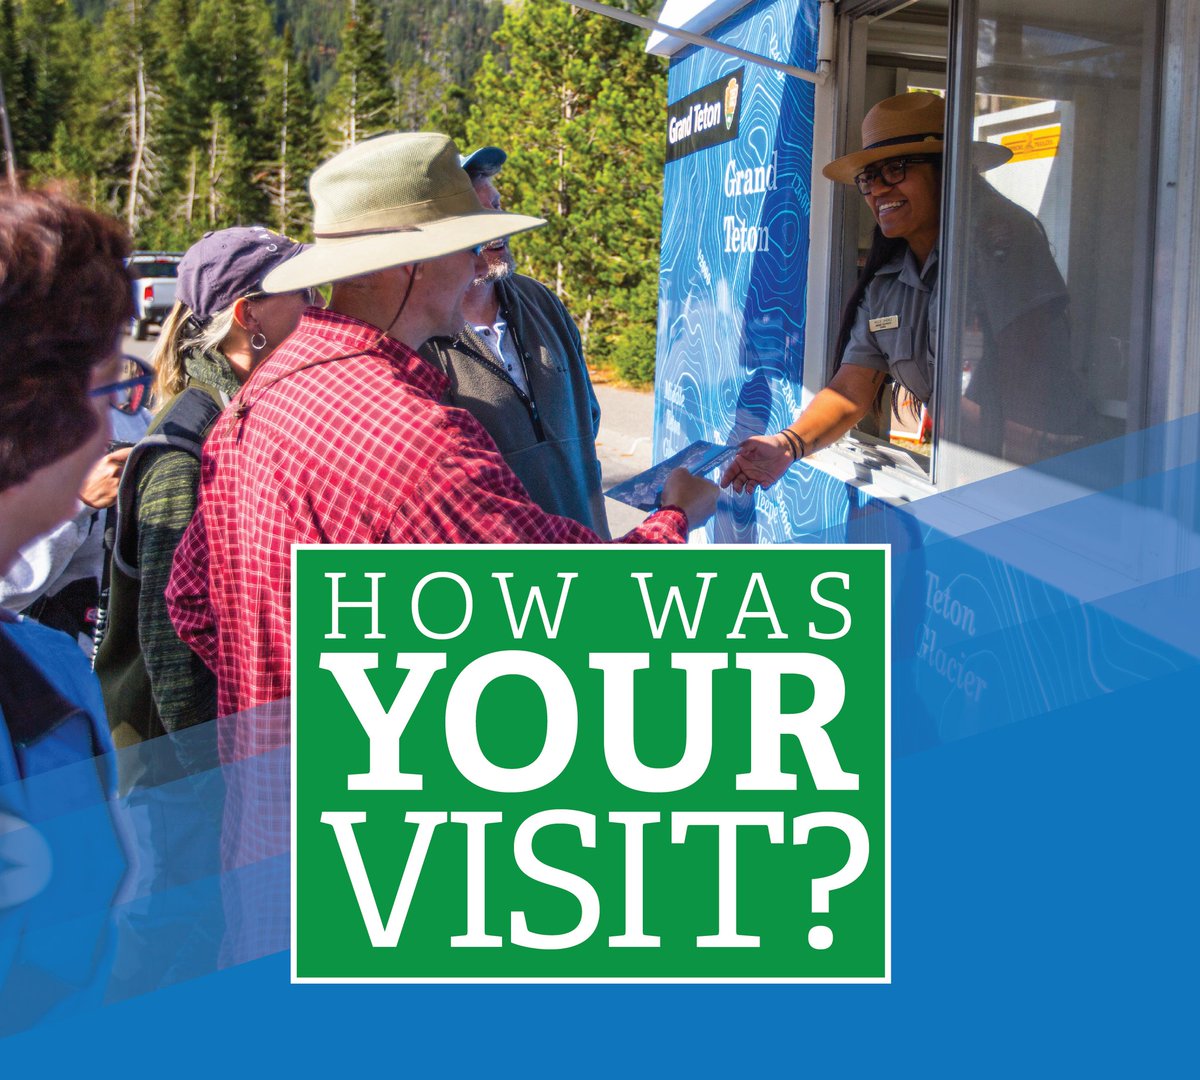 Tomorrow evening, Grand Teton will hold a public meeting to gather info on how visitors use, experience & access the park. Join us to learn about Visitor Use & Experiences Tue, 9/19, 4-6pm (MST) at the Teton County Library in Jackson, WY. Learn more at go.nps.gov/TetonVUE